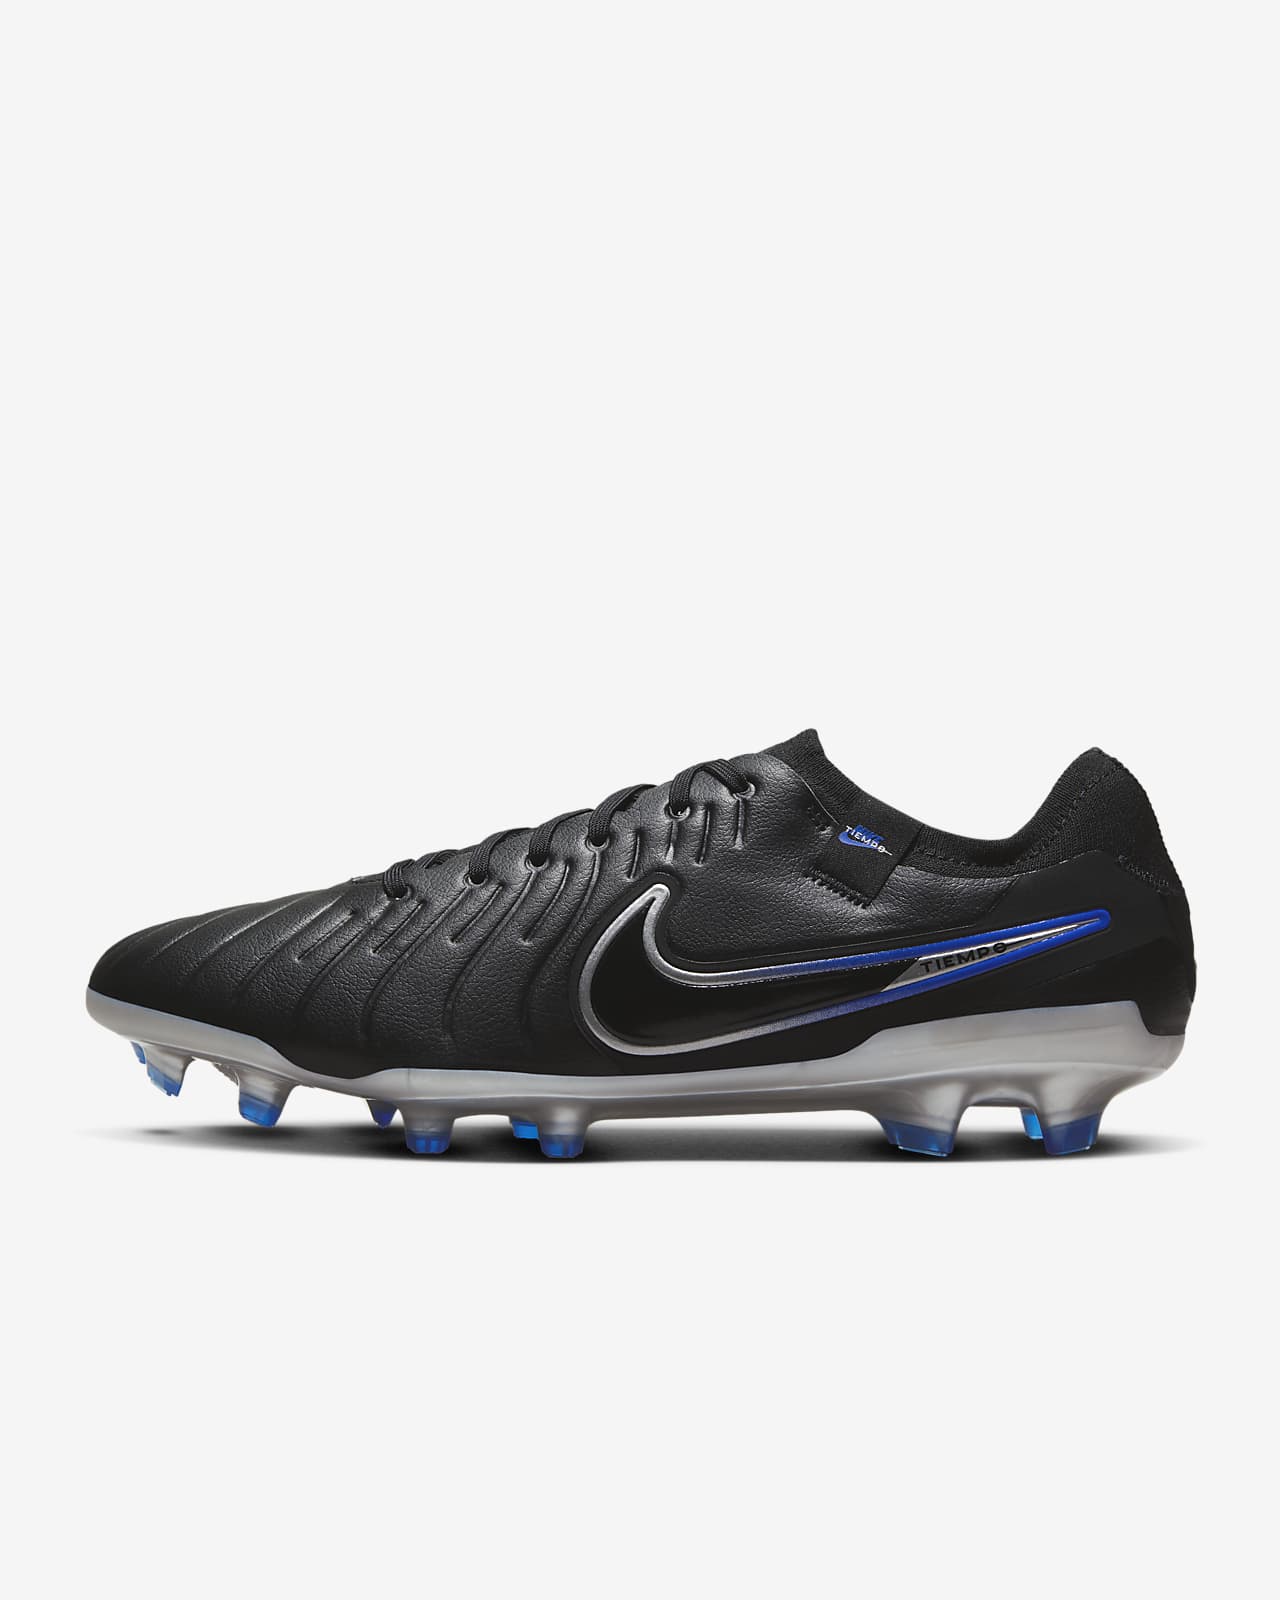 Nike Tiempo Legend 10 Pro Firm-Ground Low-Top Soccer Cleats